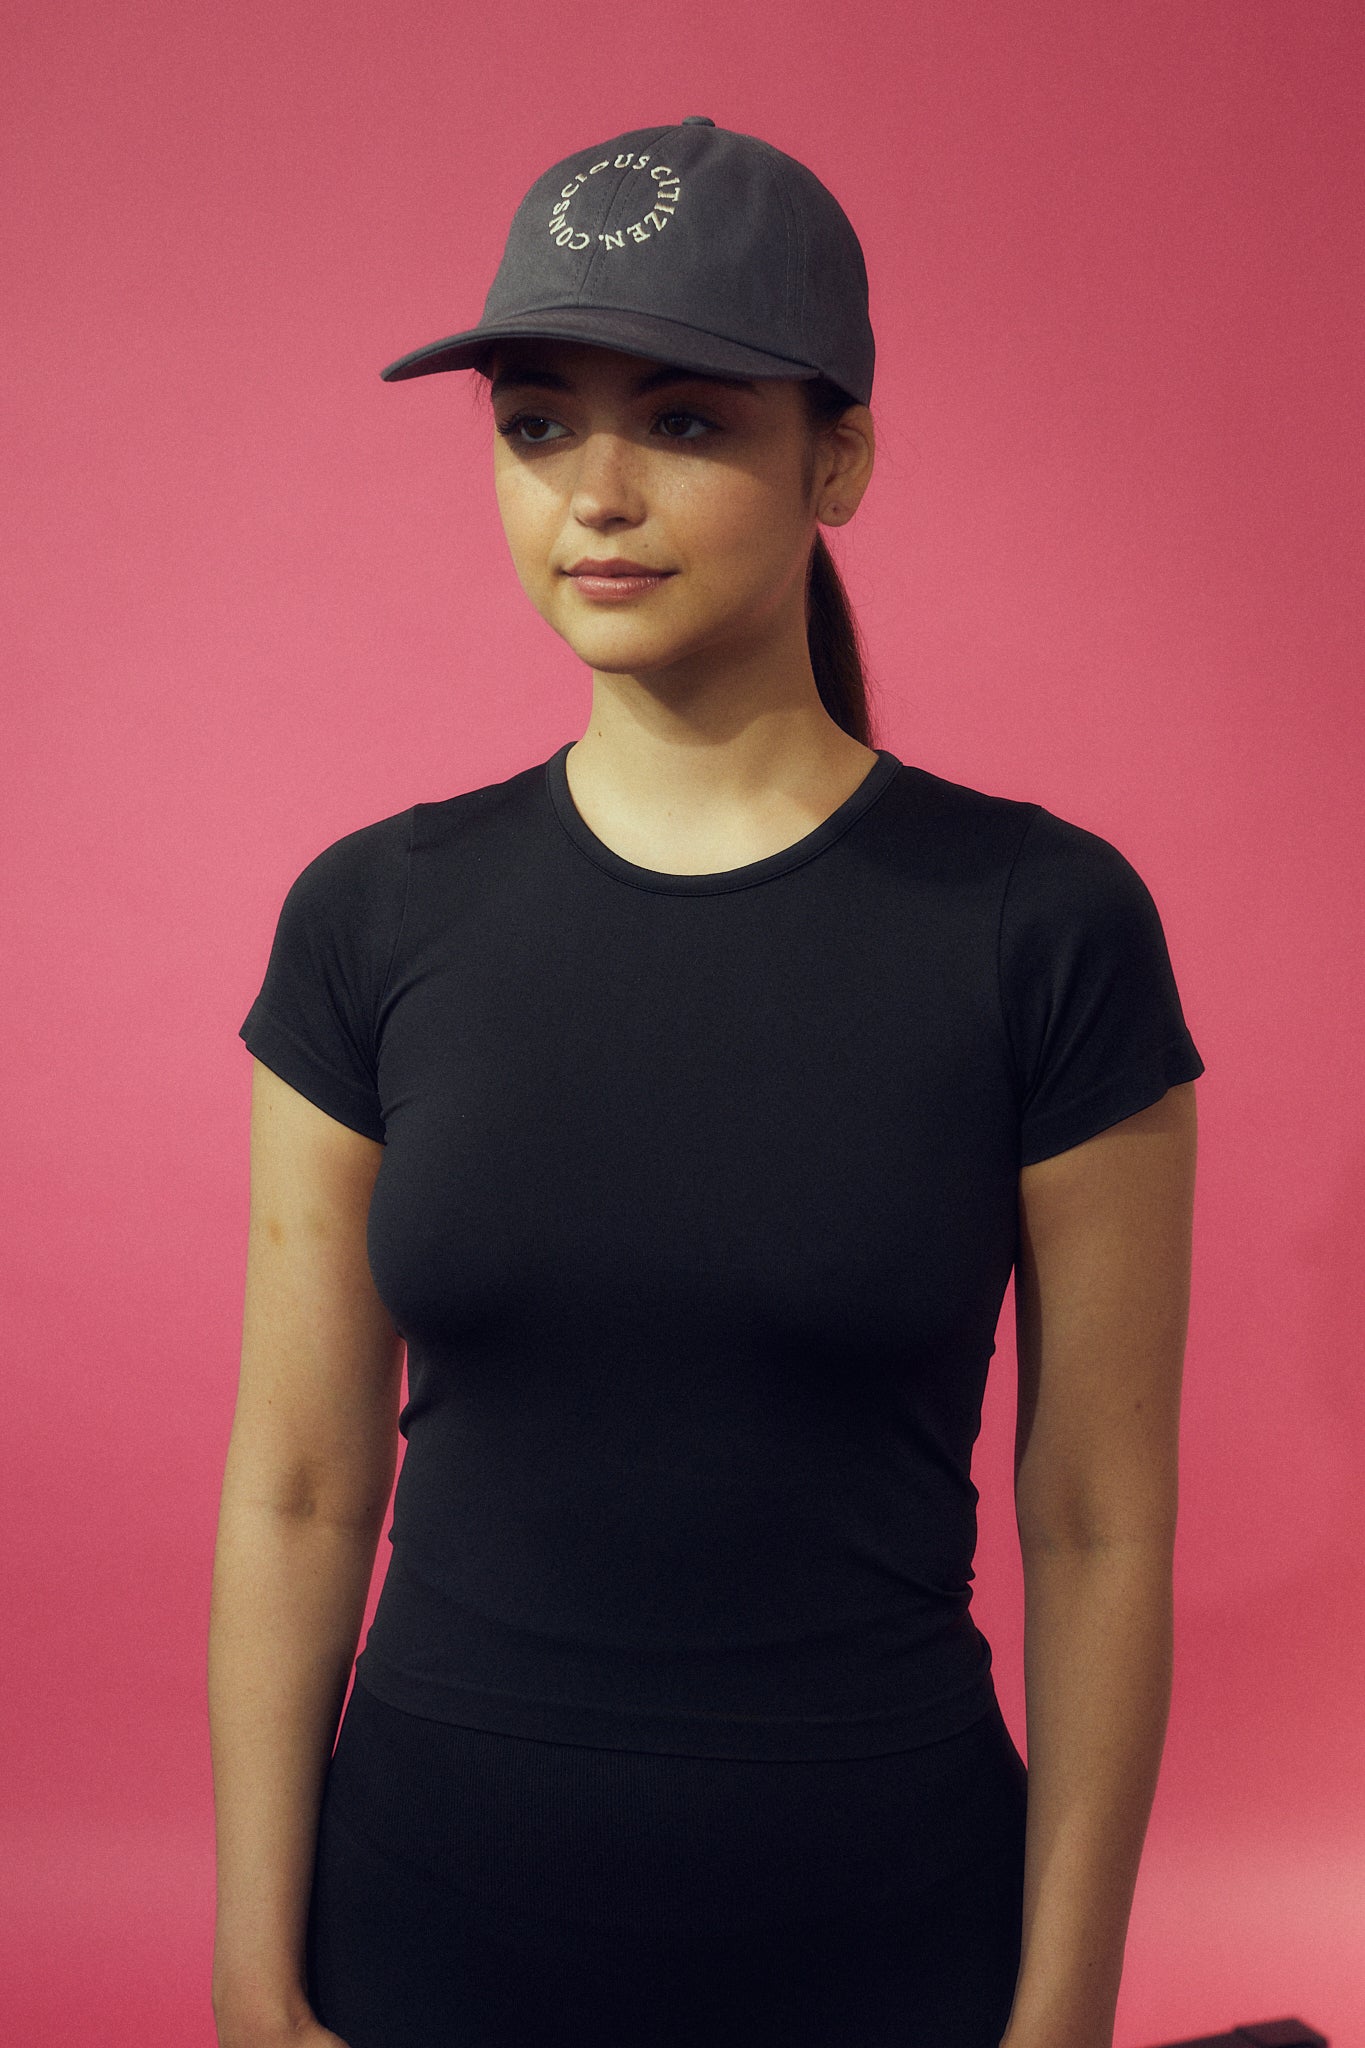  Support sustainable fashion brands with a cap that reflects their commitment to eco-consciousness